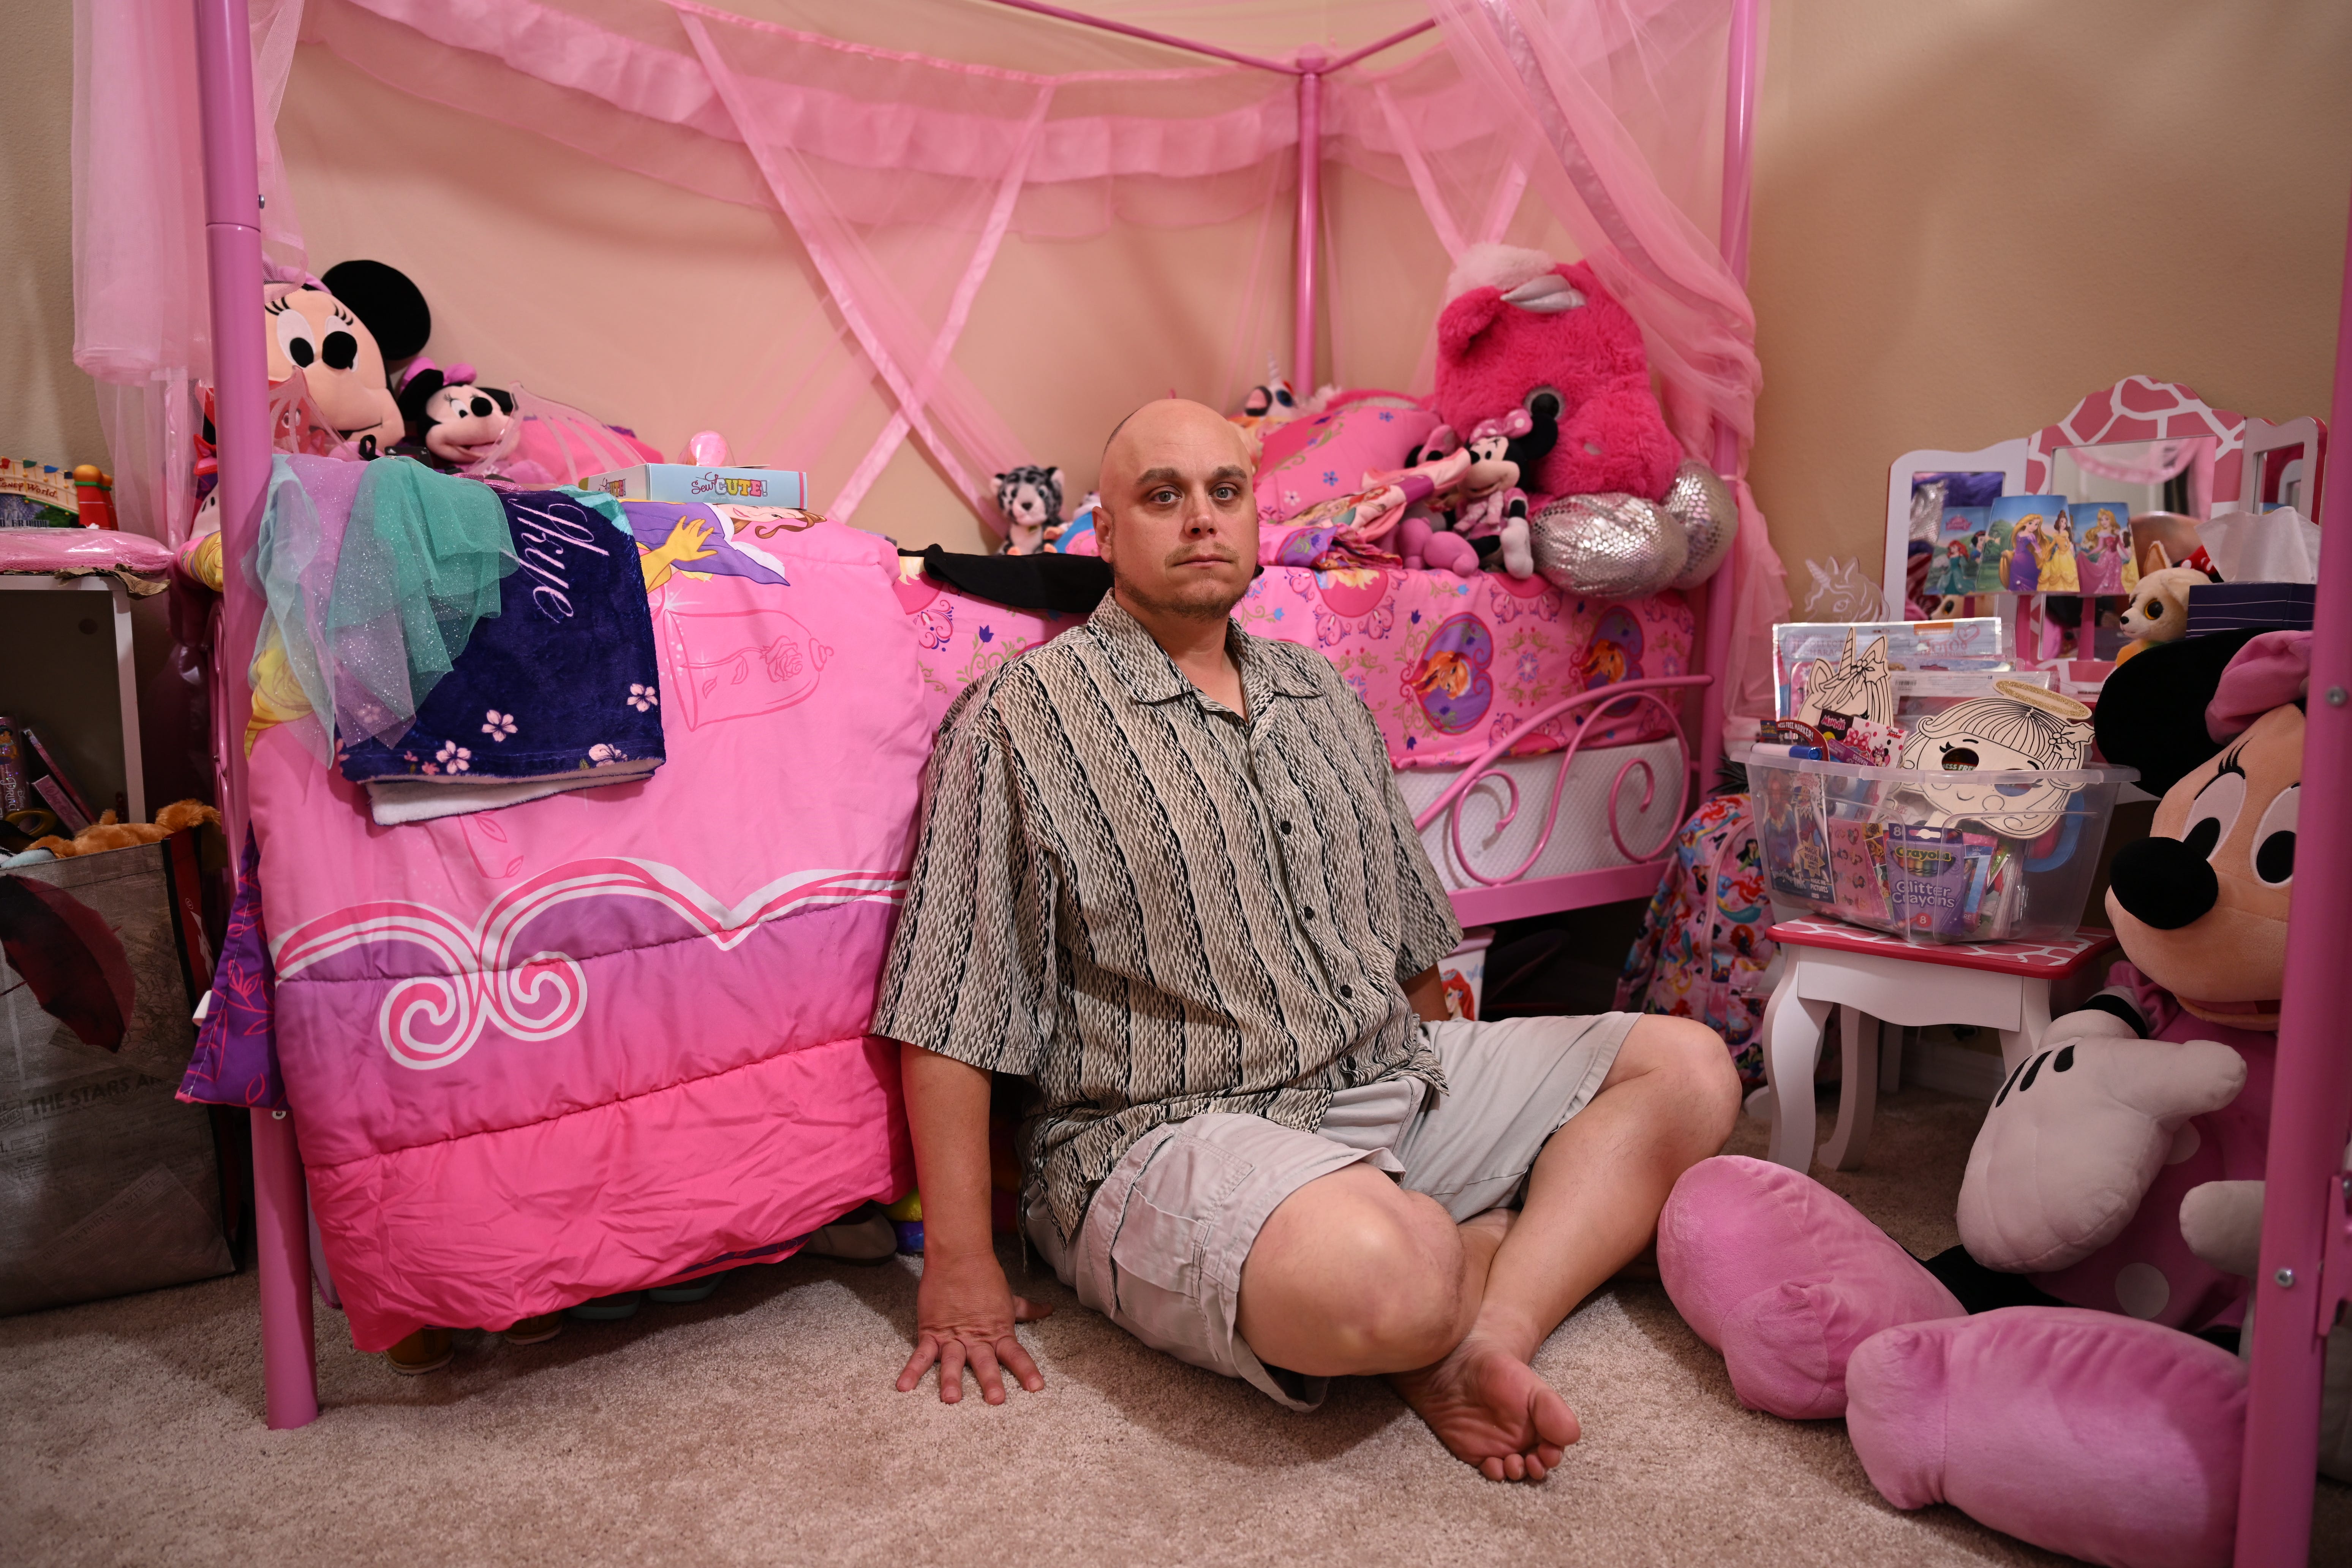 John Rex sits in his missing daughters' bedroom, which is very pink and Minnie Mouse-themed.